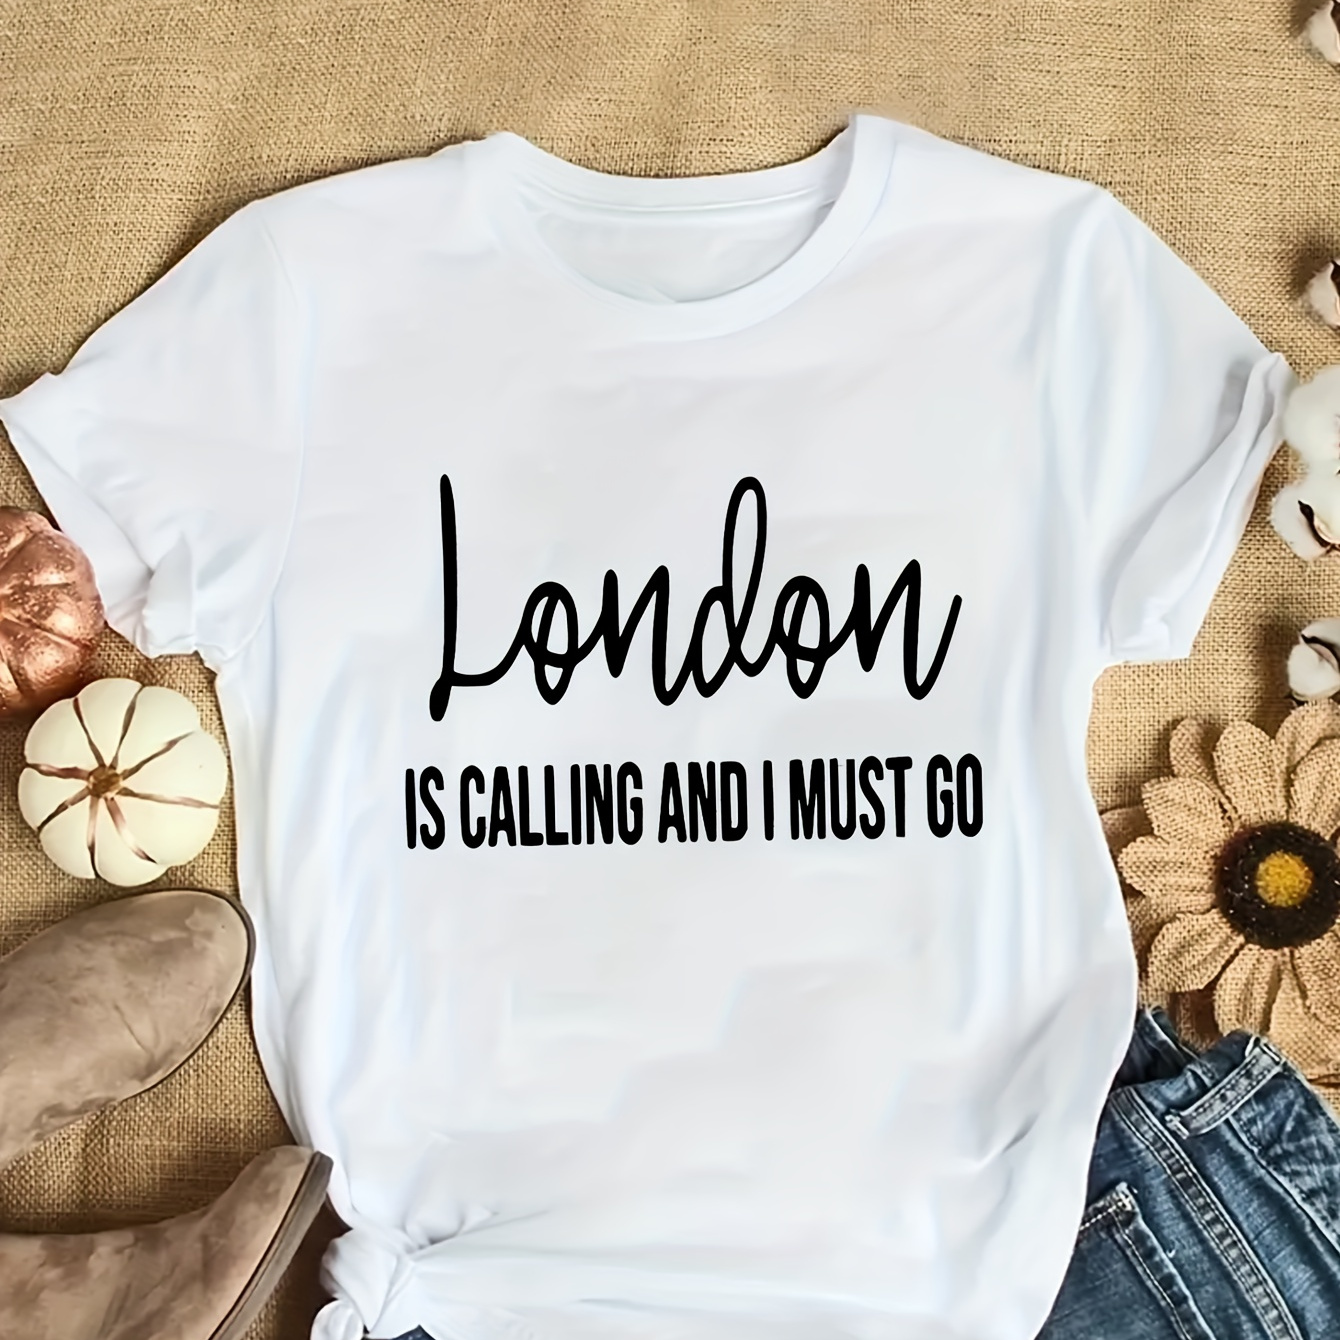 

Women's Fashion Sports T-shirt, "london Is Calling And I Must Go" Print, Casual Summer Top, Travel Tee, Family Vacation Apparel, England Trip Souvenir, Soft